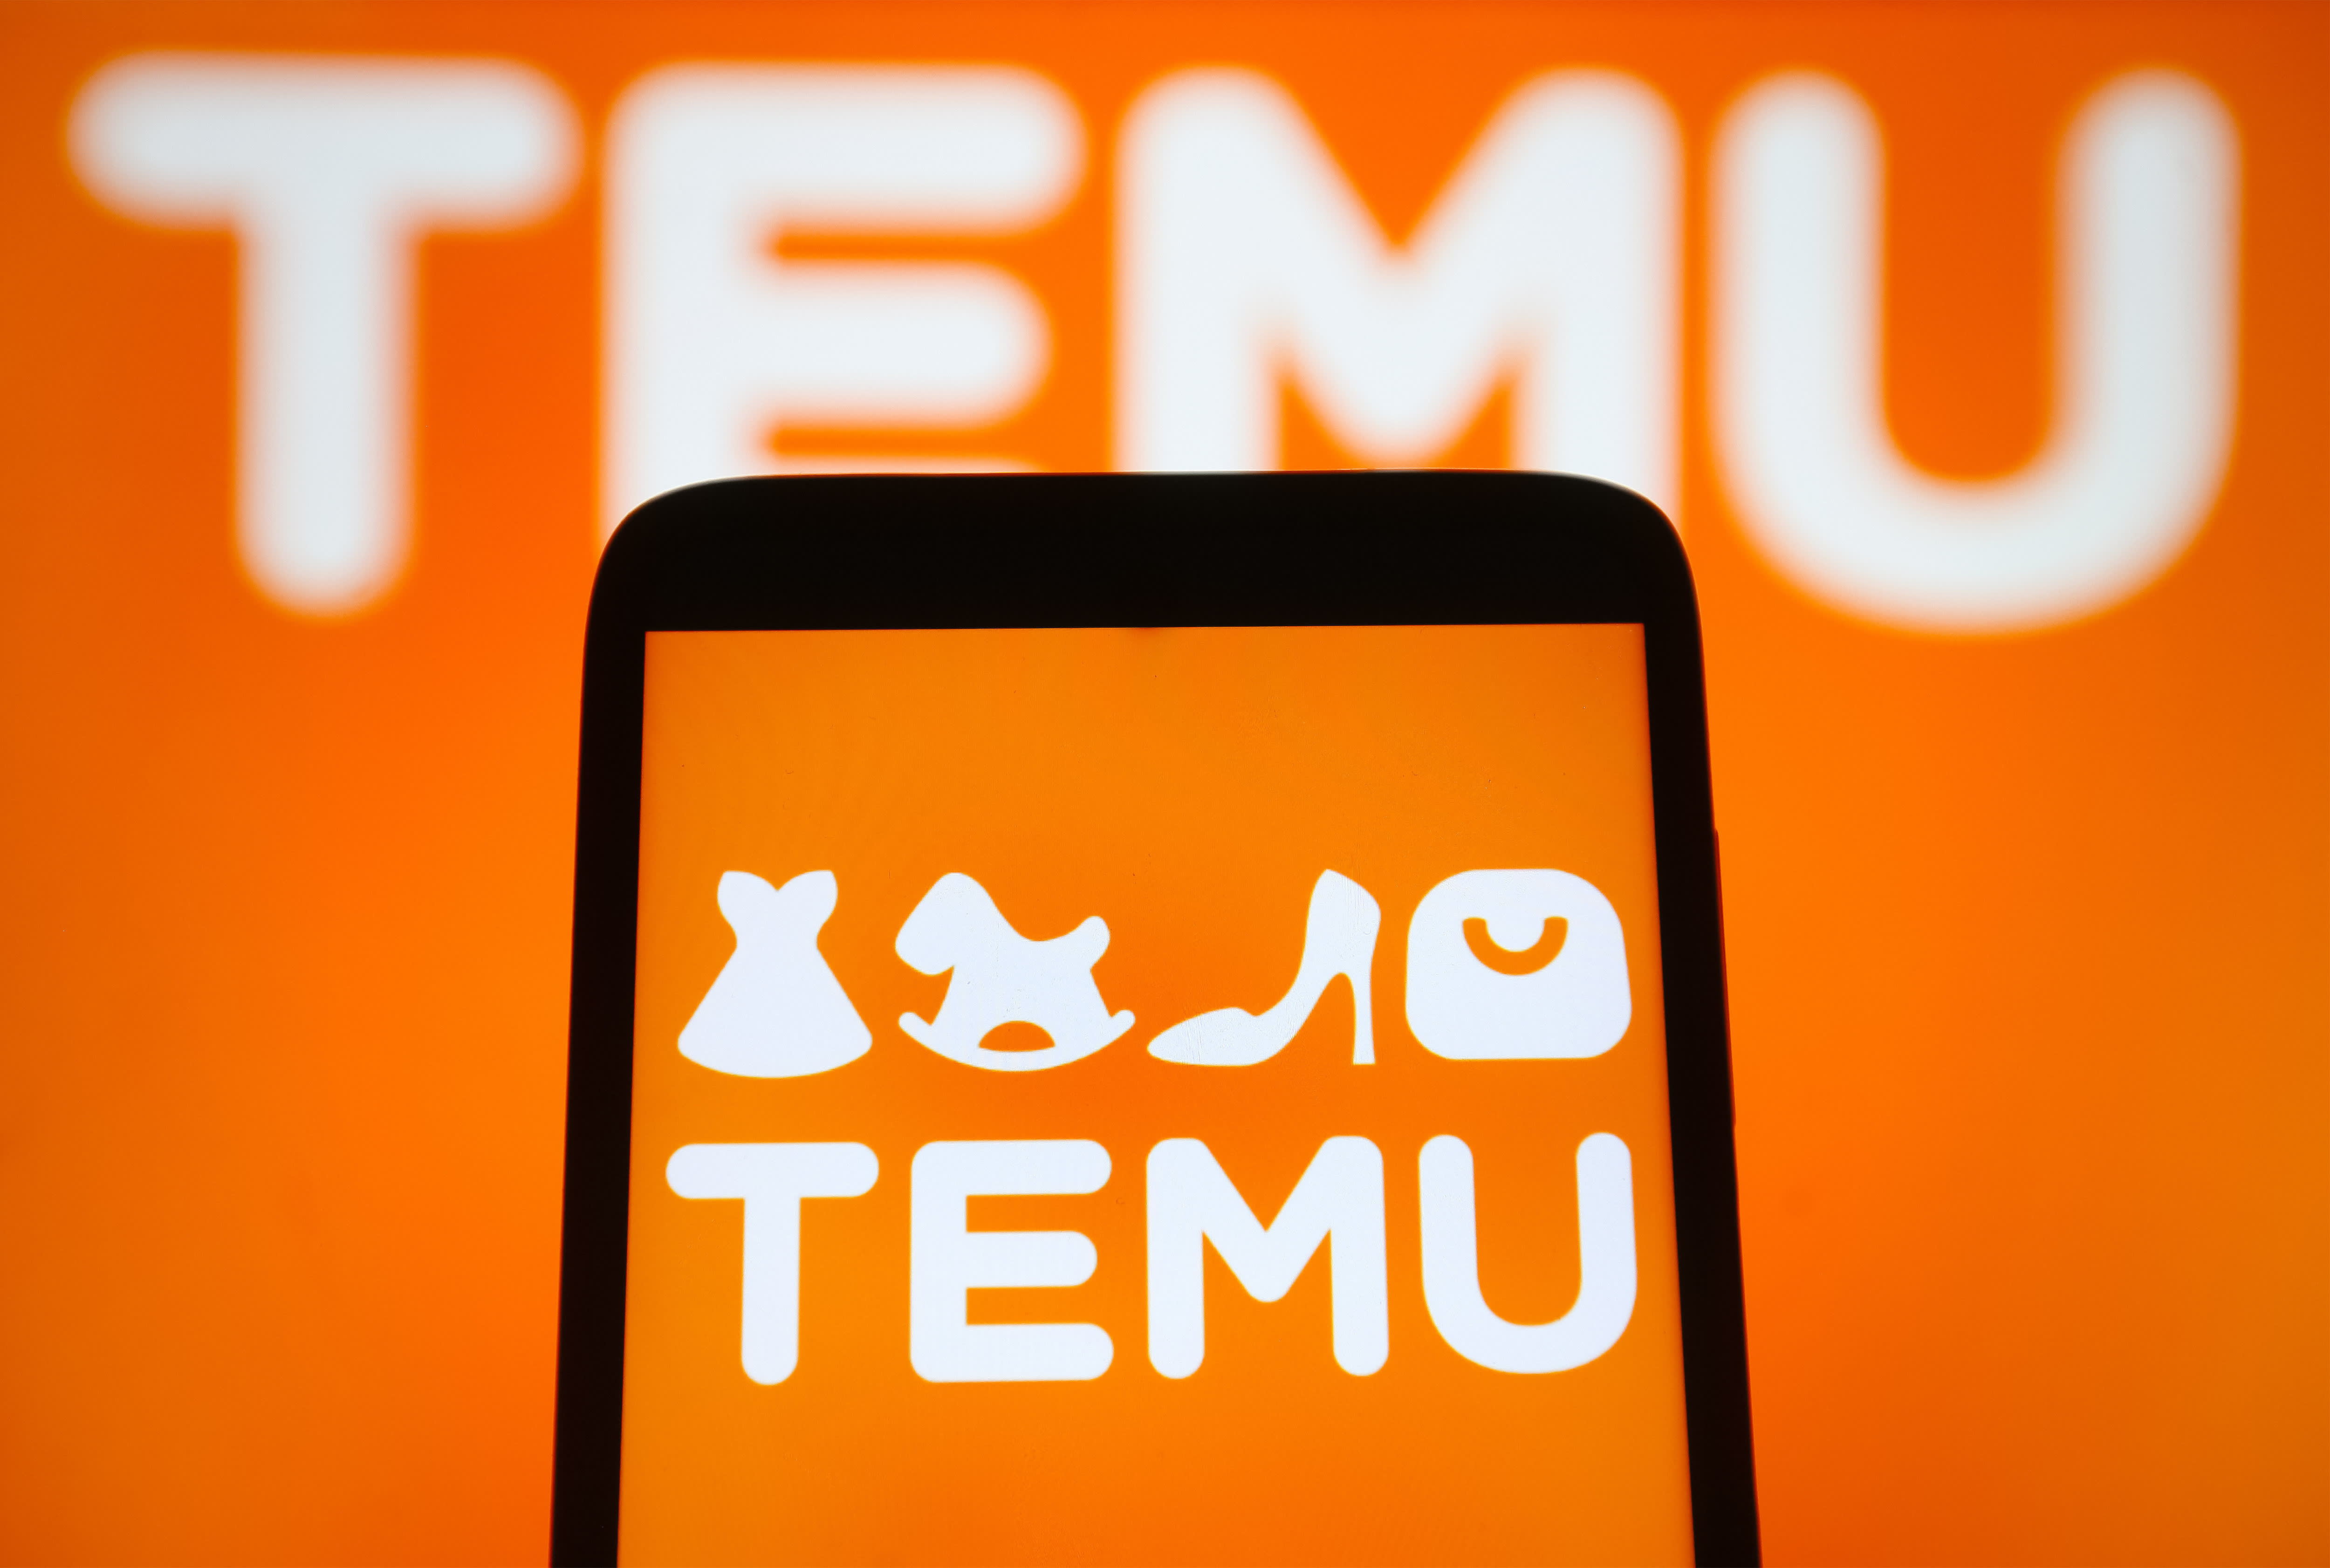 Temu vs. : Which shopping site is best for your buying needs?